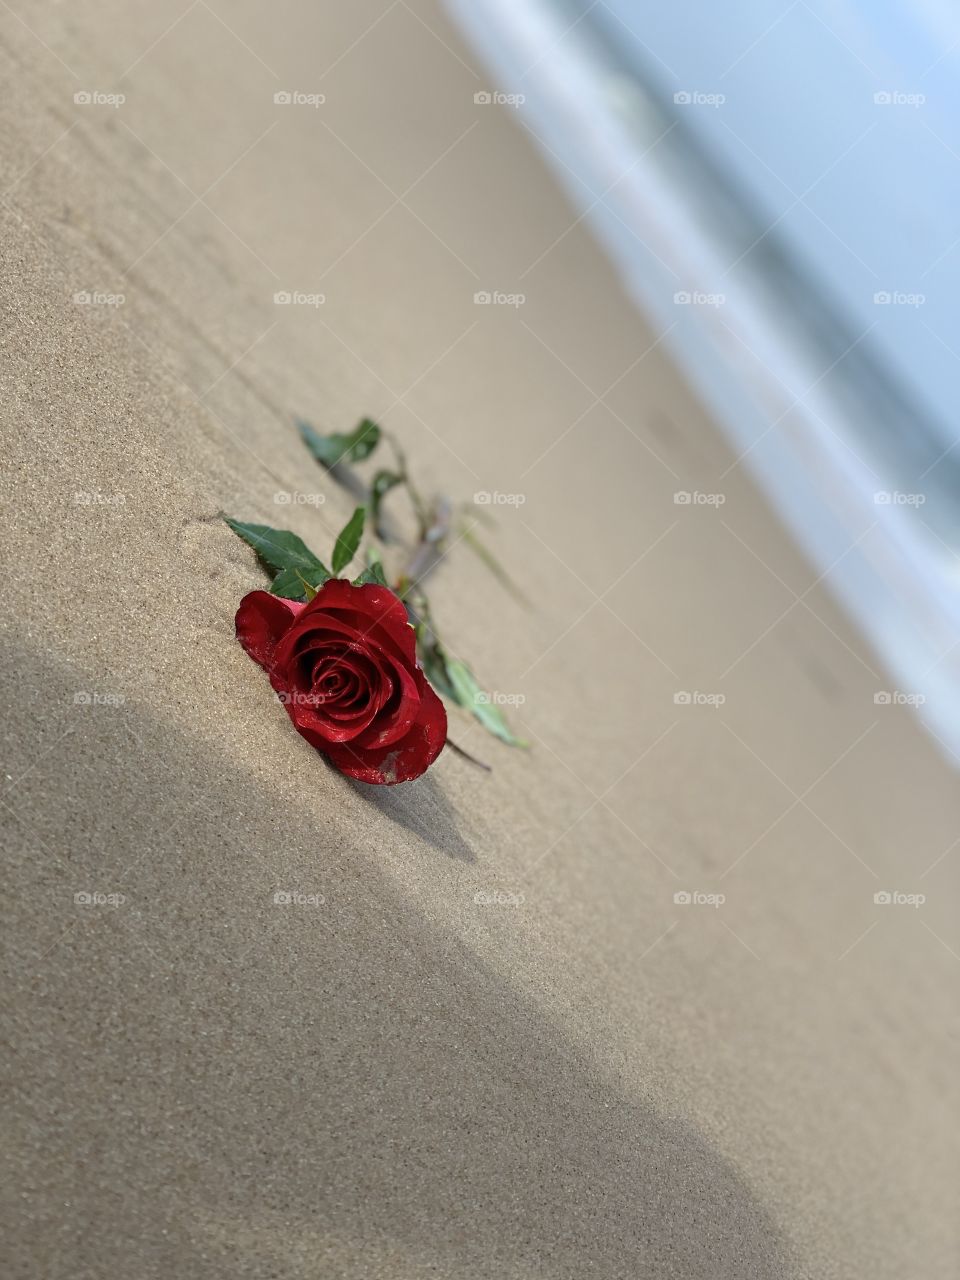 Red rose on the beach